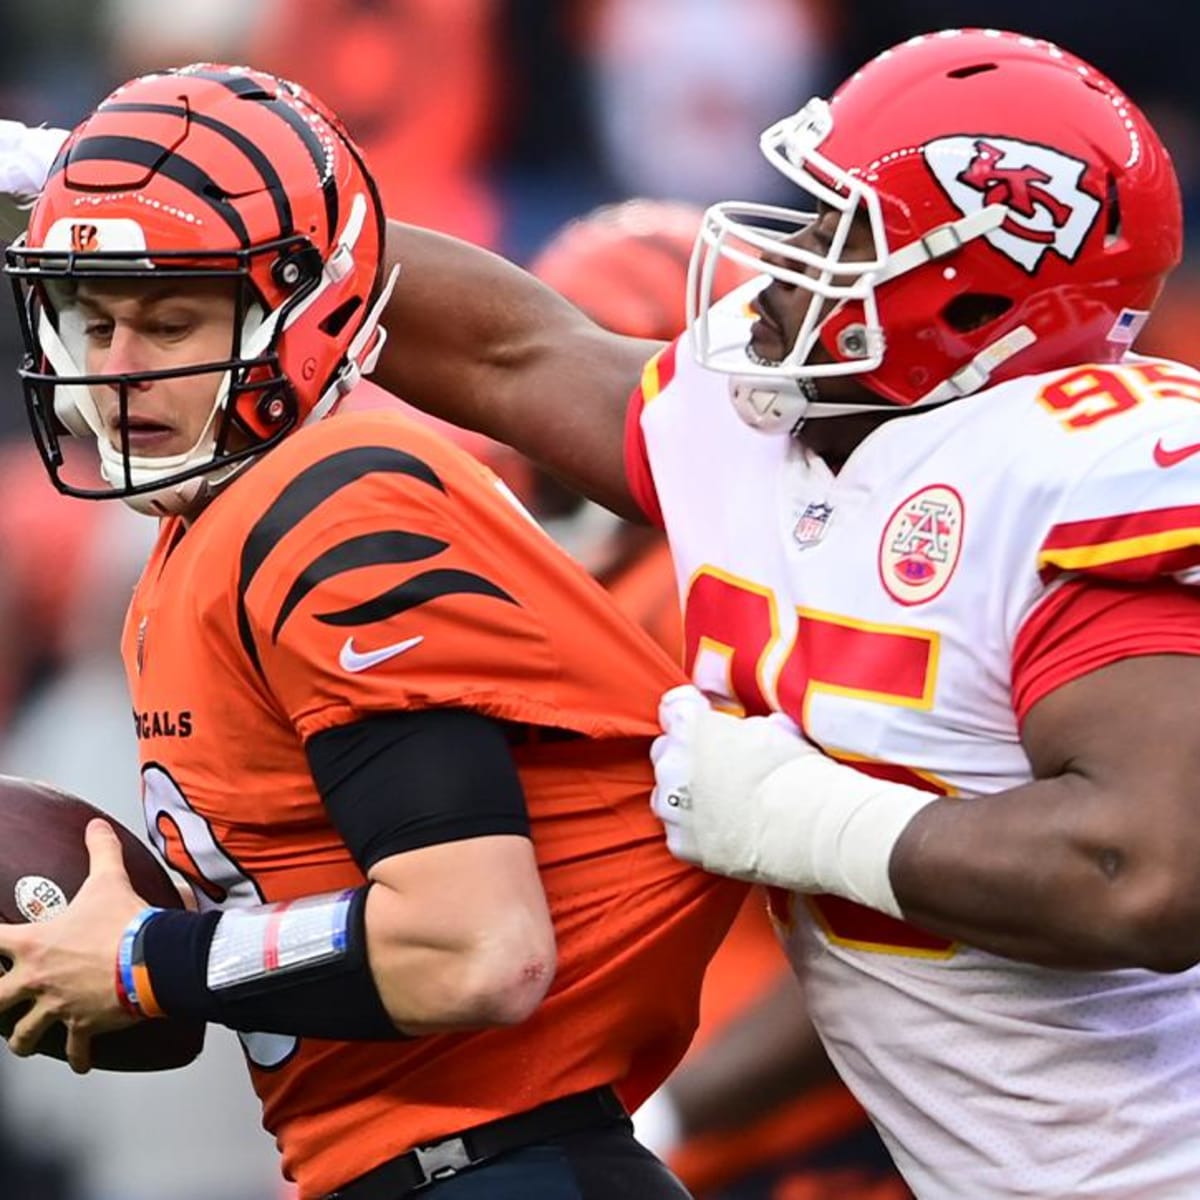 Bengals-Chiefs AFC championship game odds, lines, spread and bet